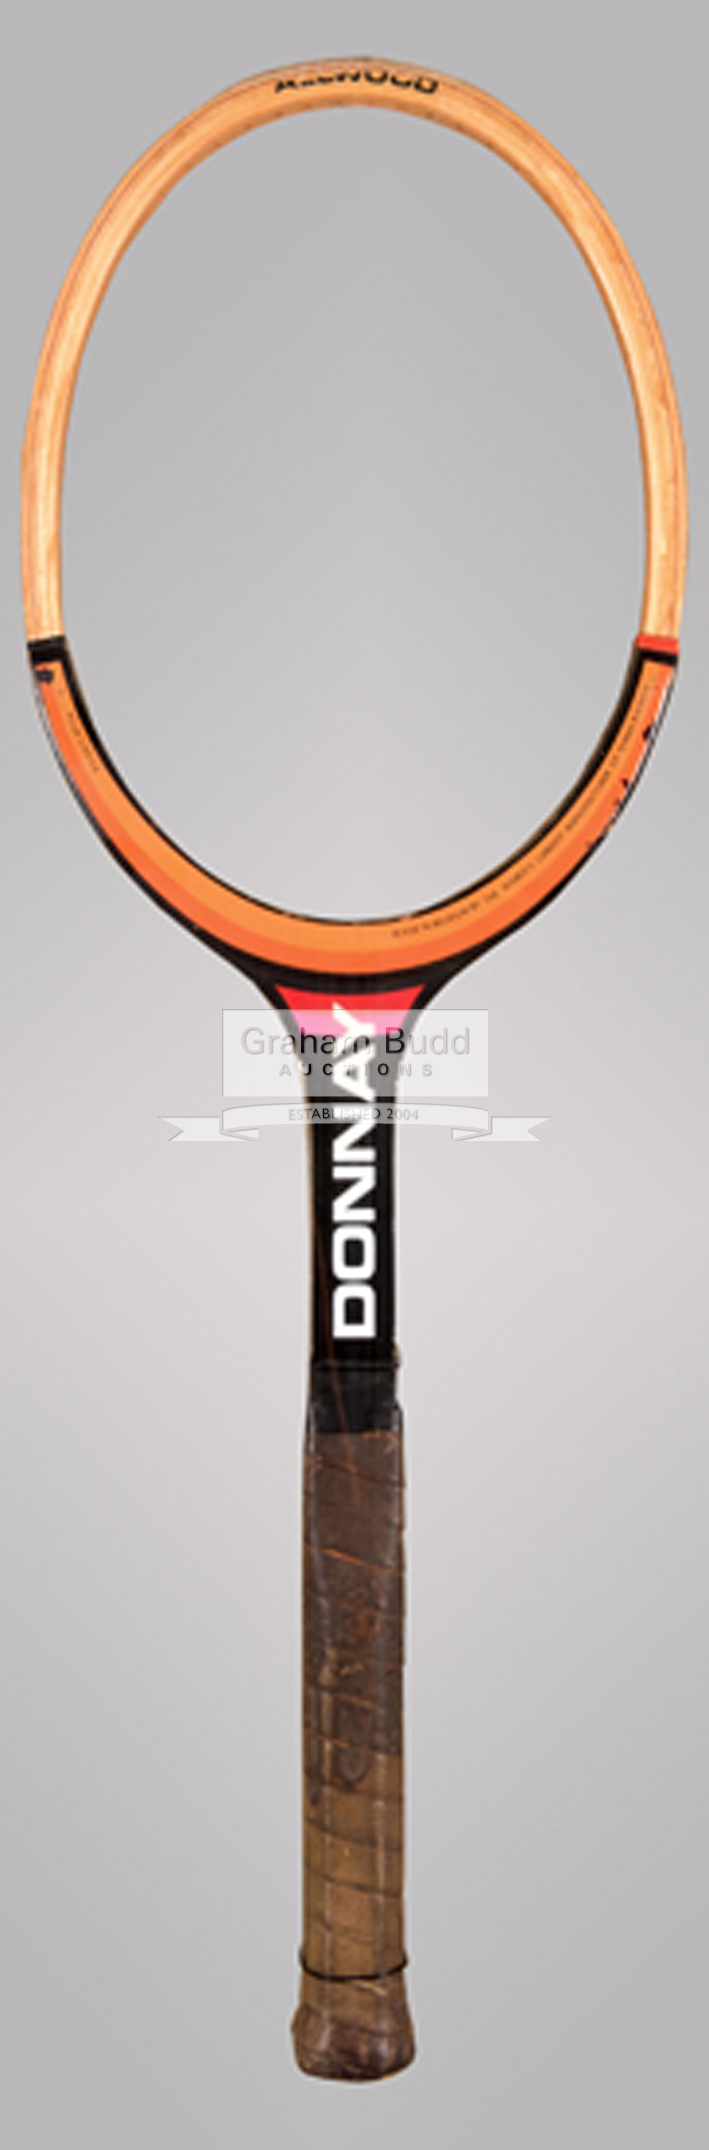 Bjorn Borg Donnay tennis racquet match used at the 1978 Stockholm Open when he played John McEnroe